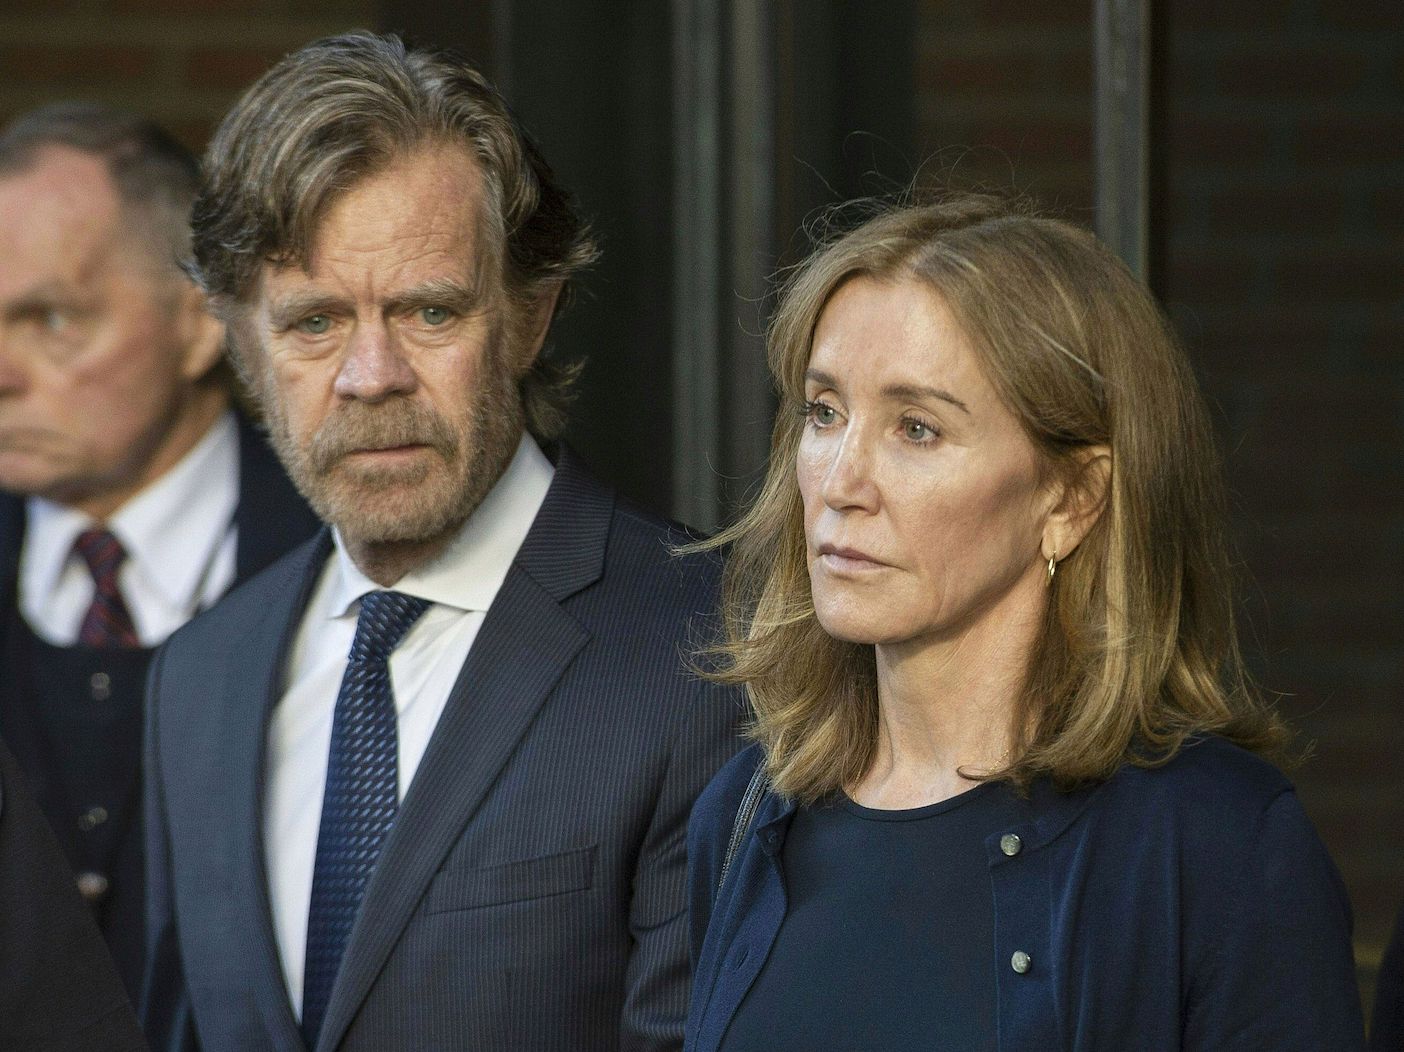 Felicity Huffman Allegedly Near Divorce From William H. Macy After Prison Time, Dubious Sources Say